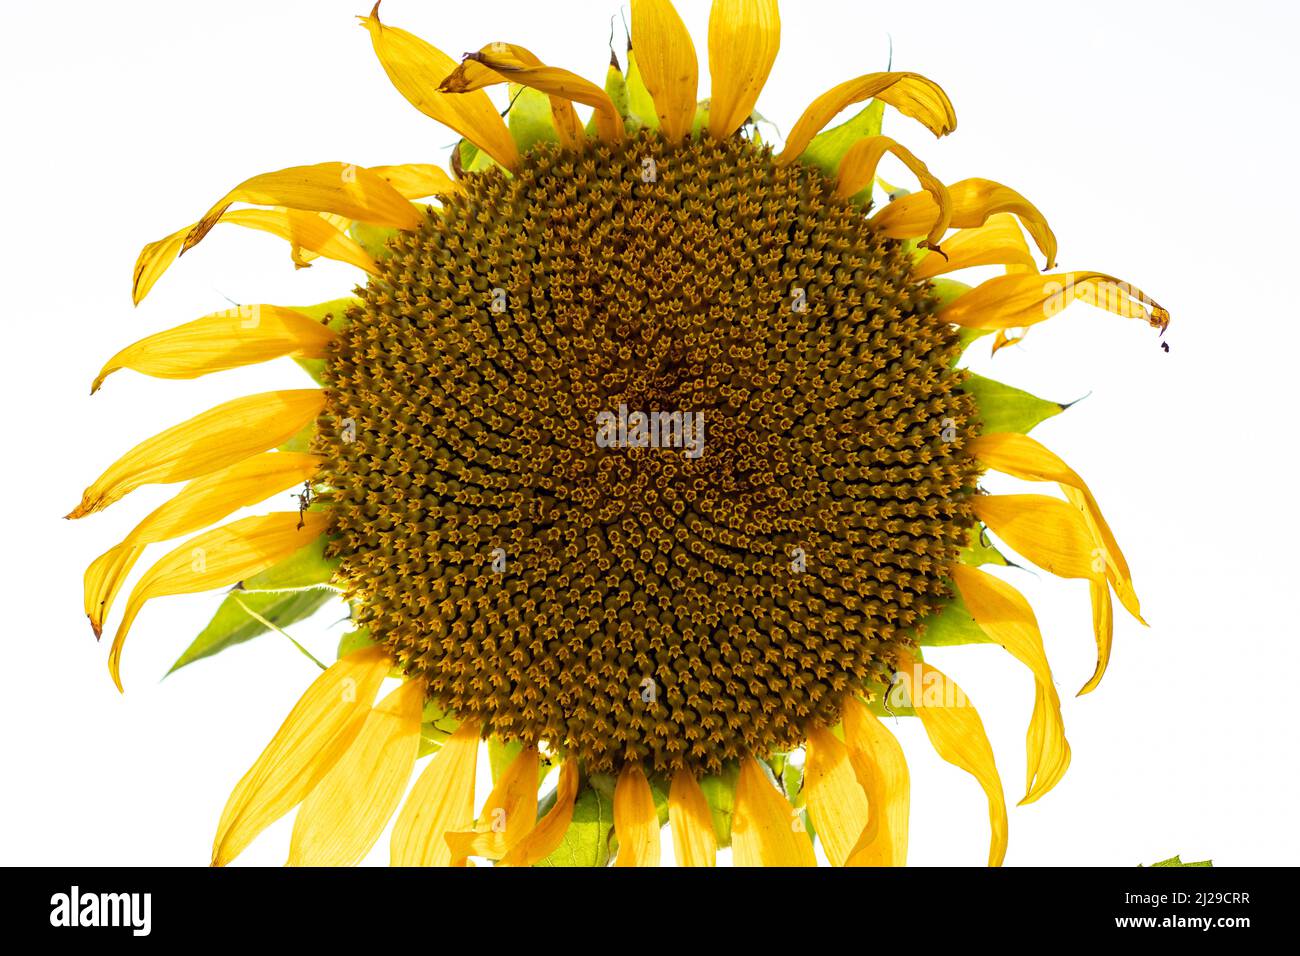 The large yellow flower is the sunflower like flower face. Perennial flowering plants in the daisy family Asteraceae commonly known as sunflowers Stock Photo